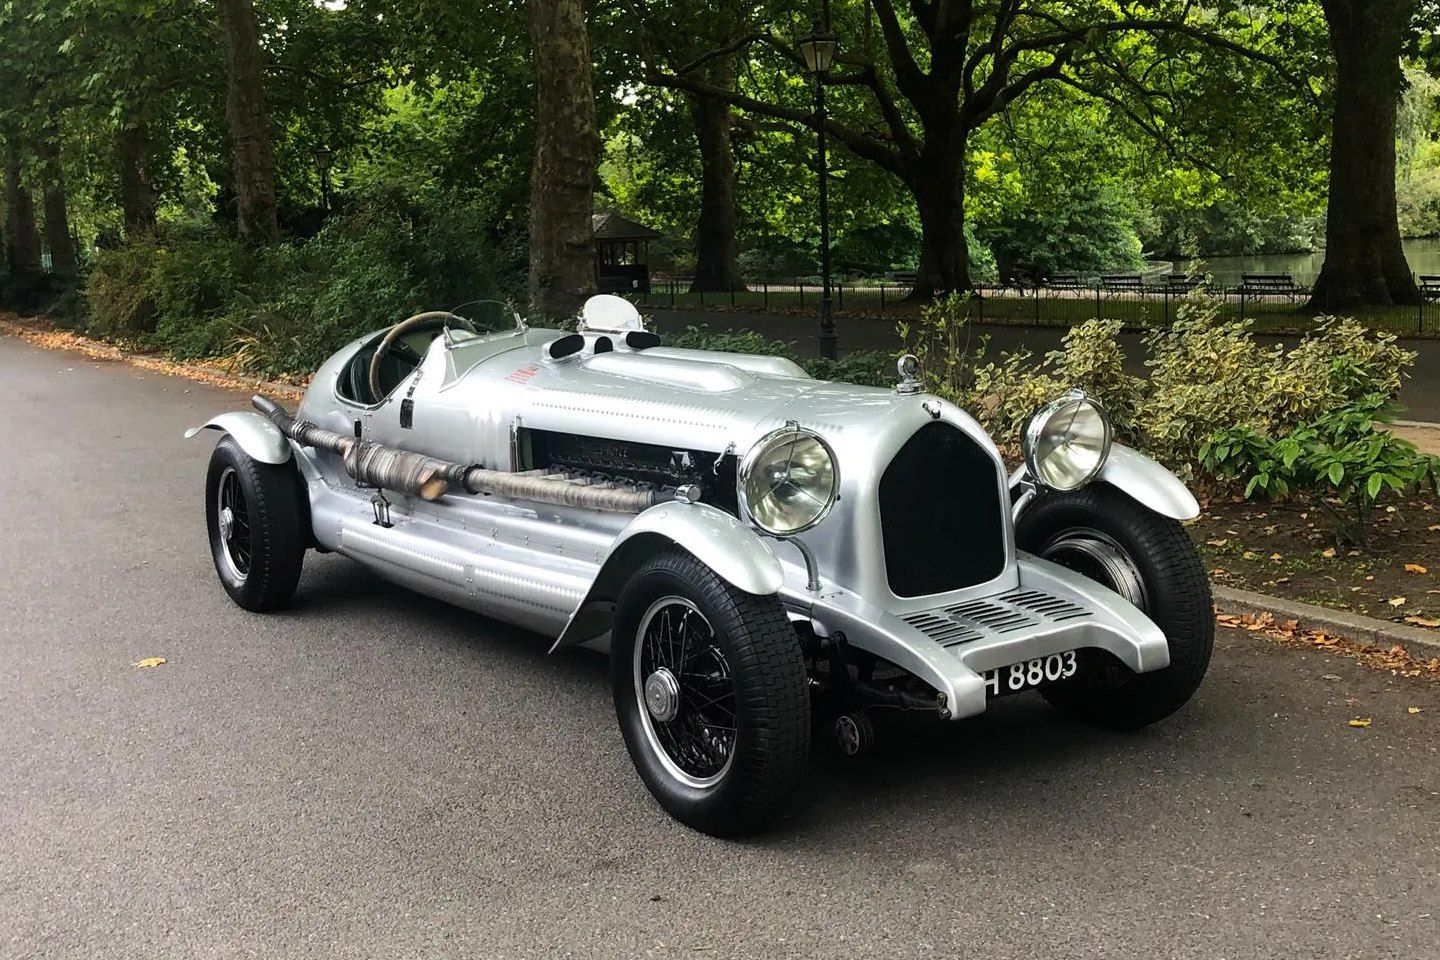 This Beast of a Car Is Powered by a World War 2 Plane Engine